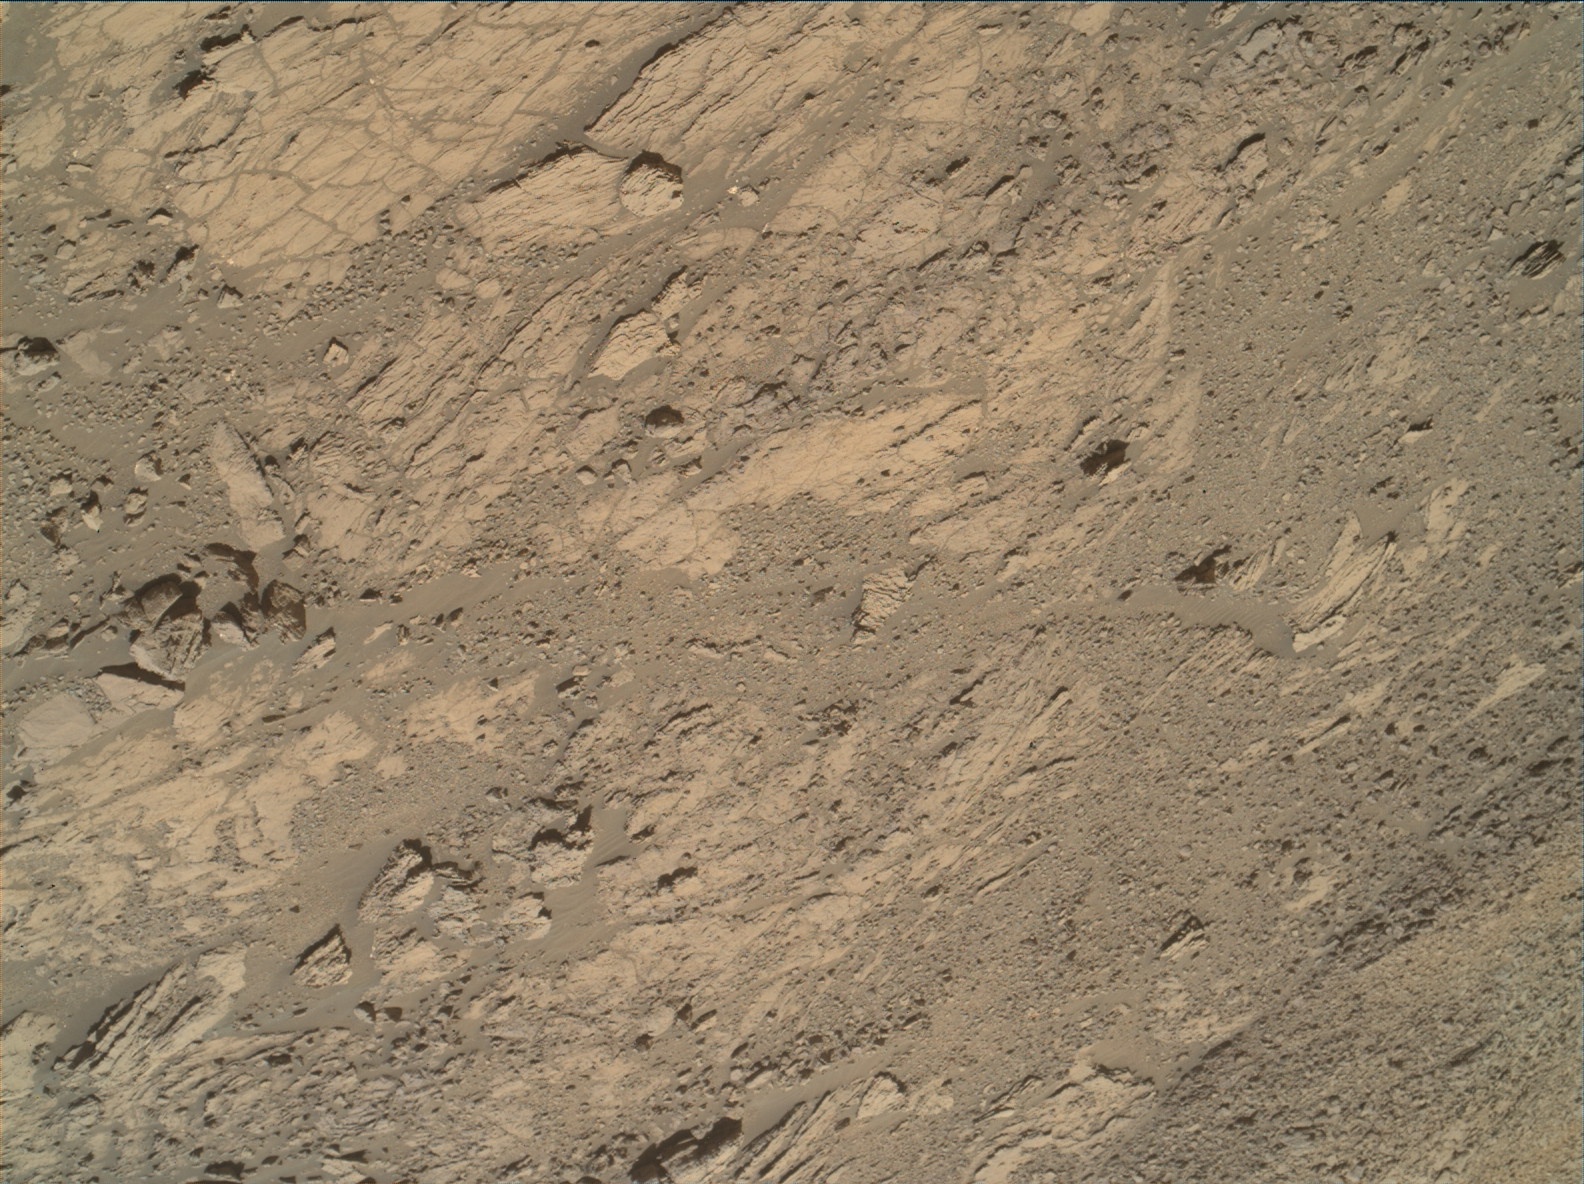 Nasa's Mars rover Curiosity acquired this image using its Mars Hand Lens Imager (MAHLI) on Sol 1943